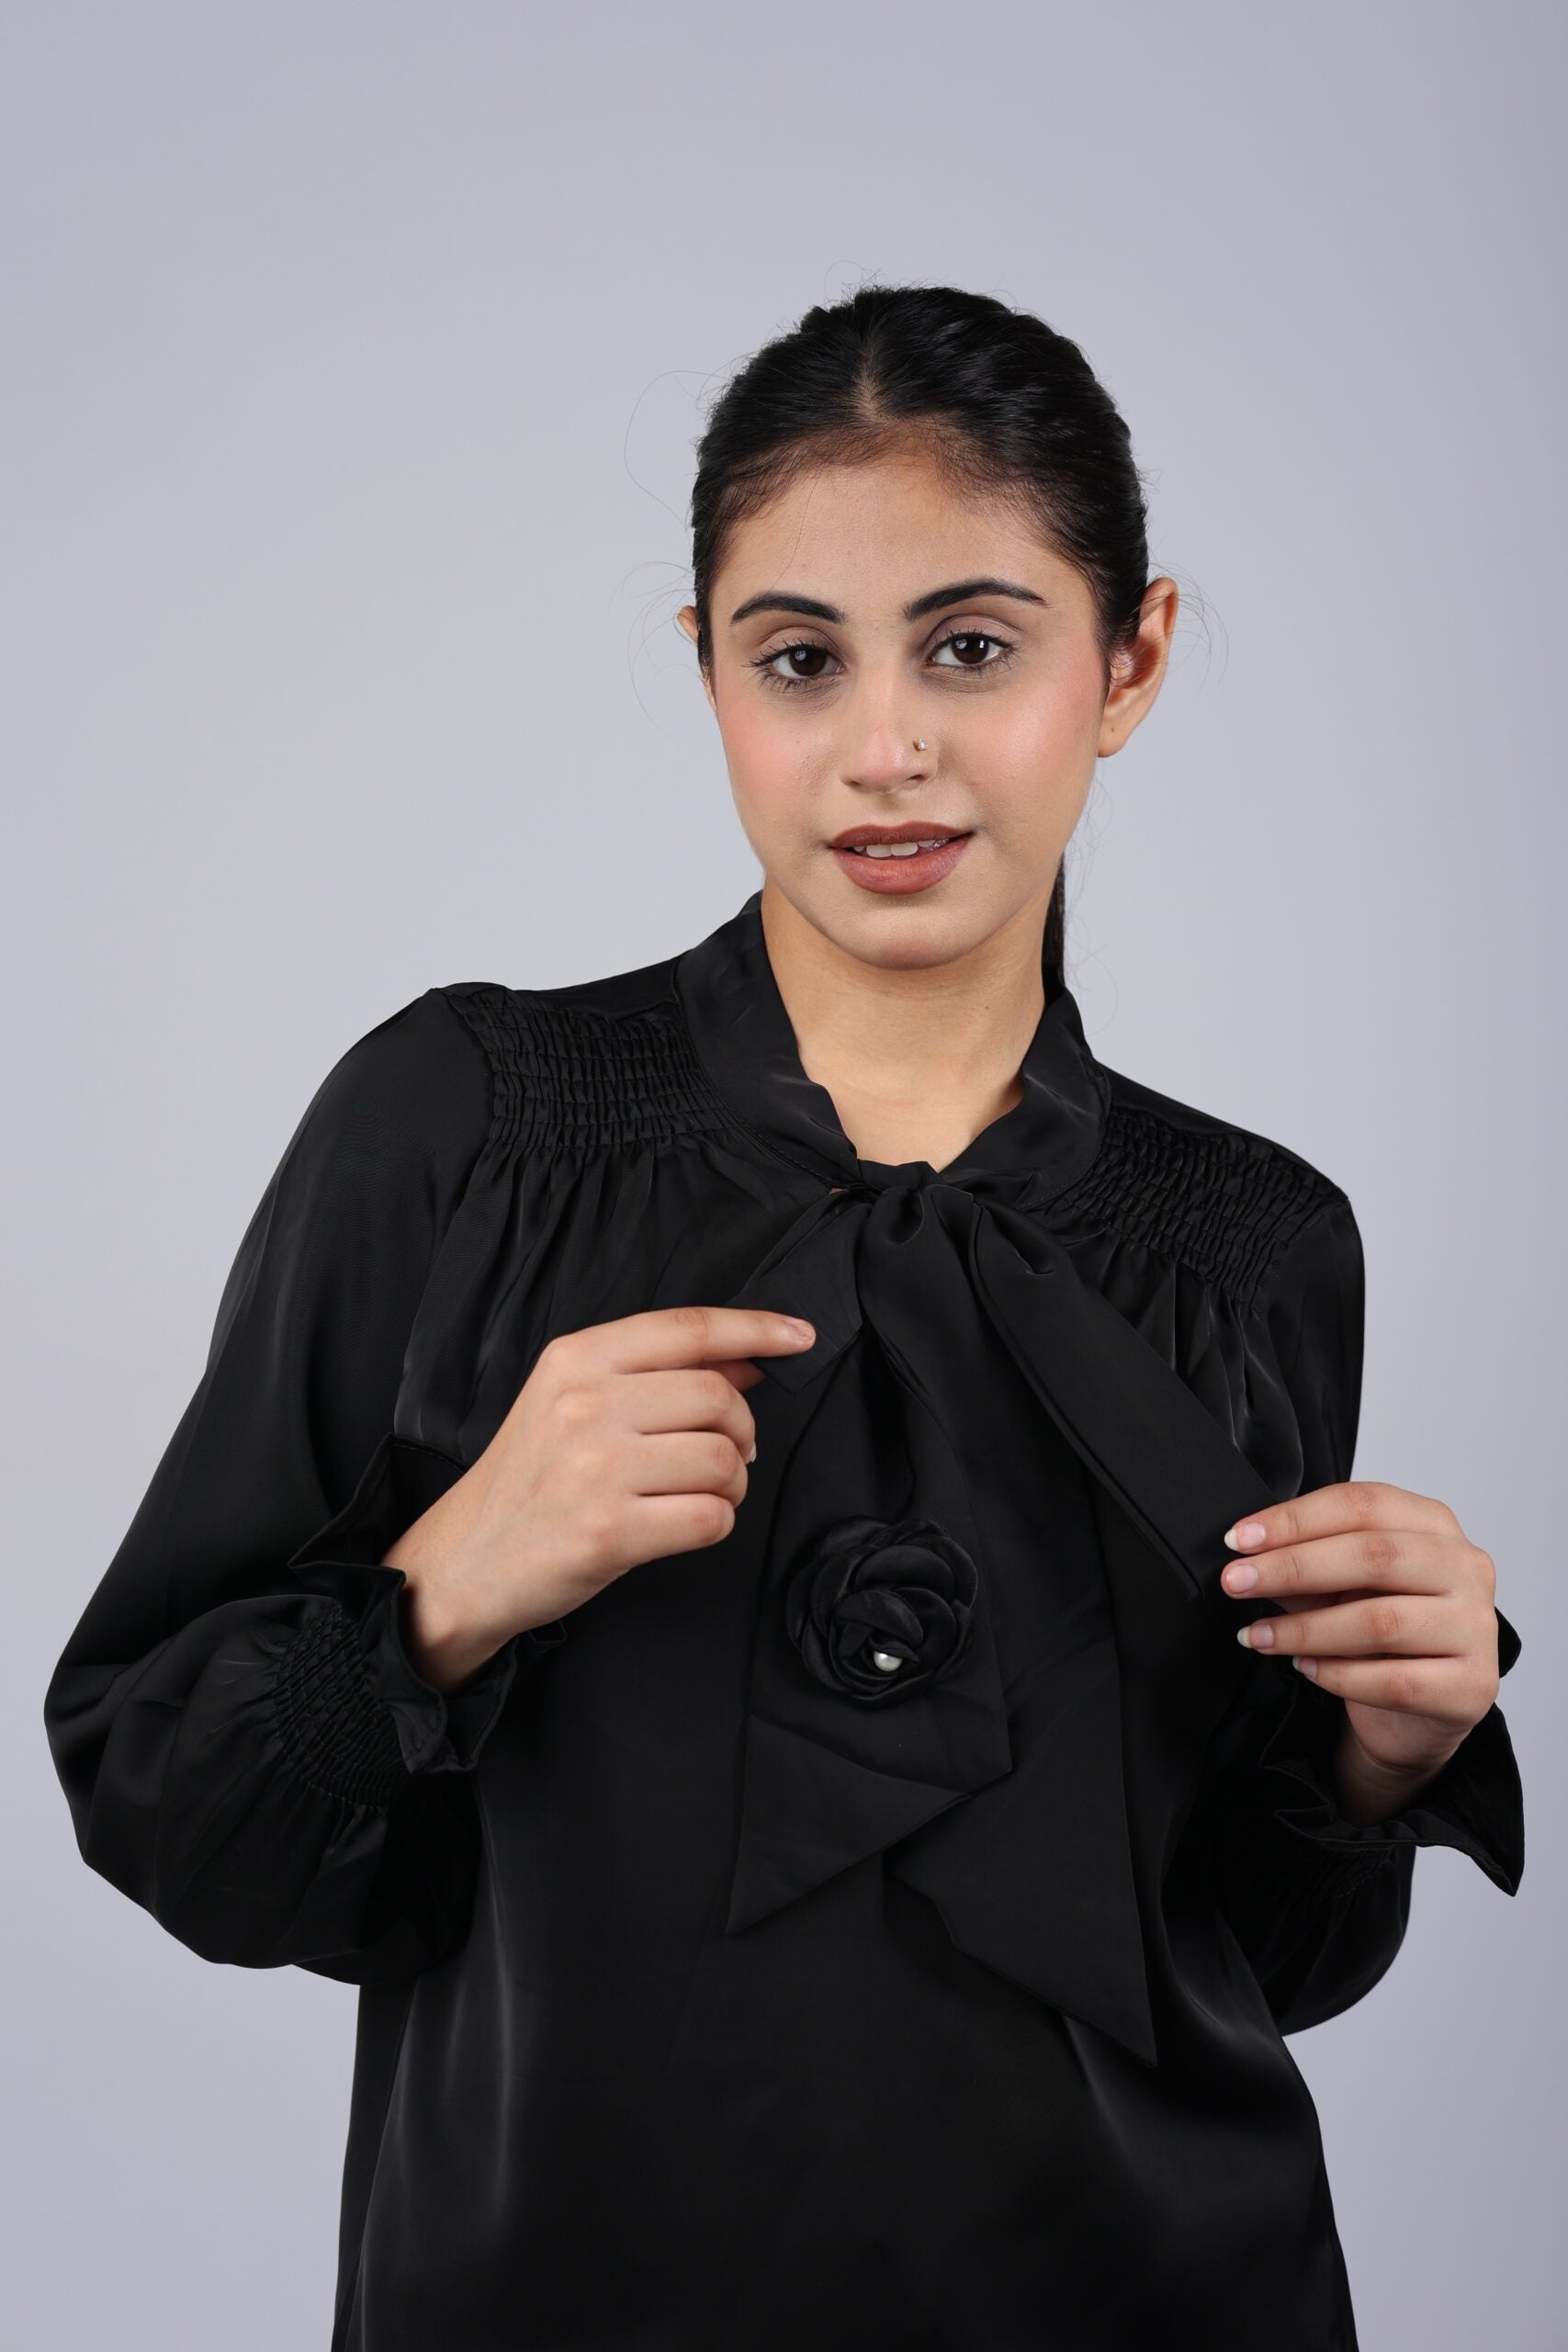 Front Rose Formal/Casual Top (Black) A Perfect Blend of Elegance and Versatility!